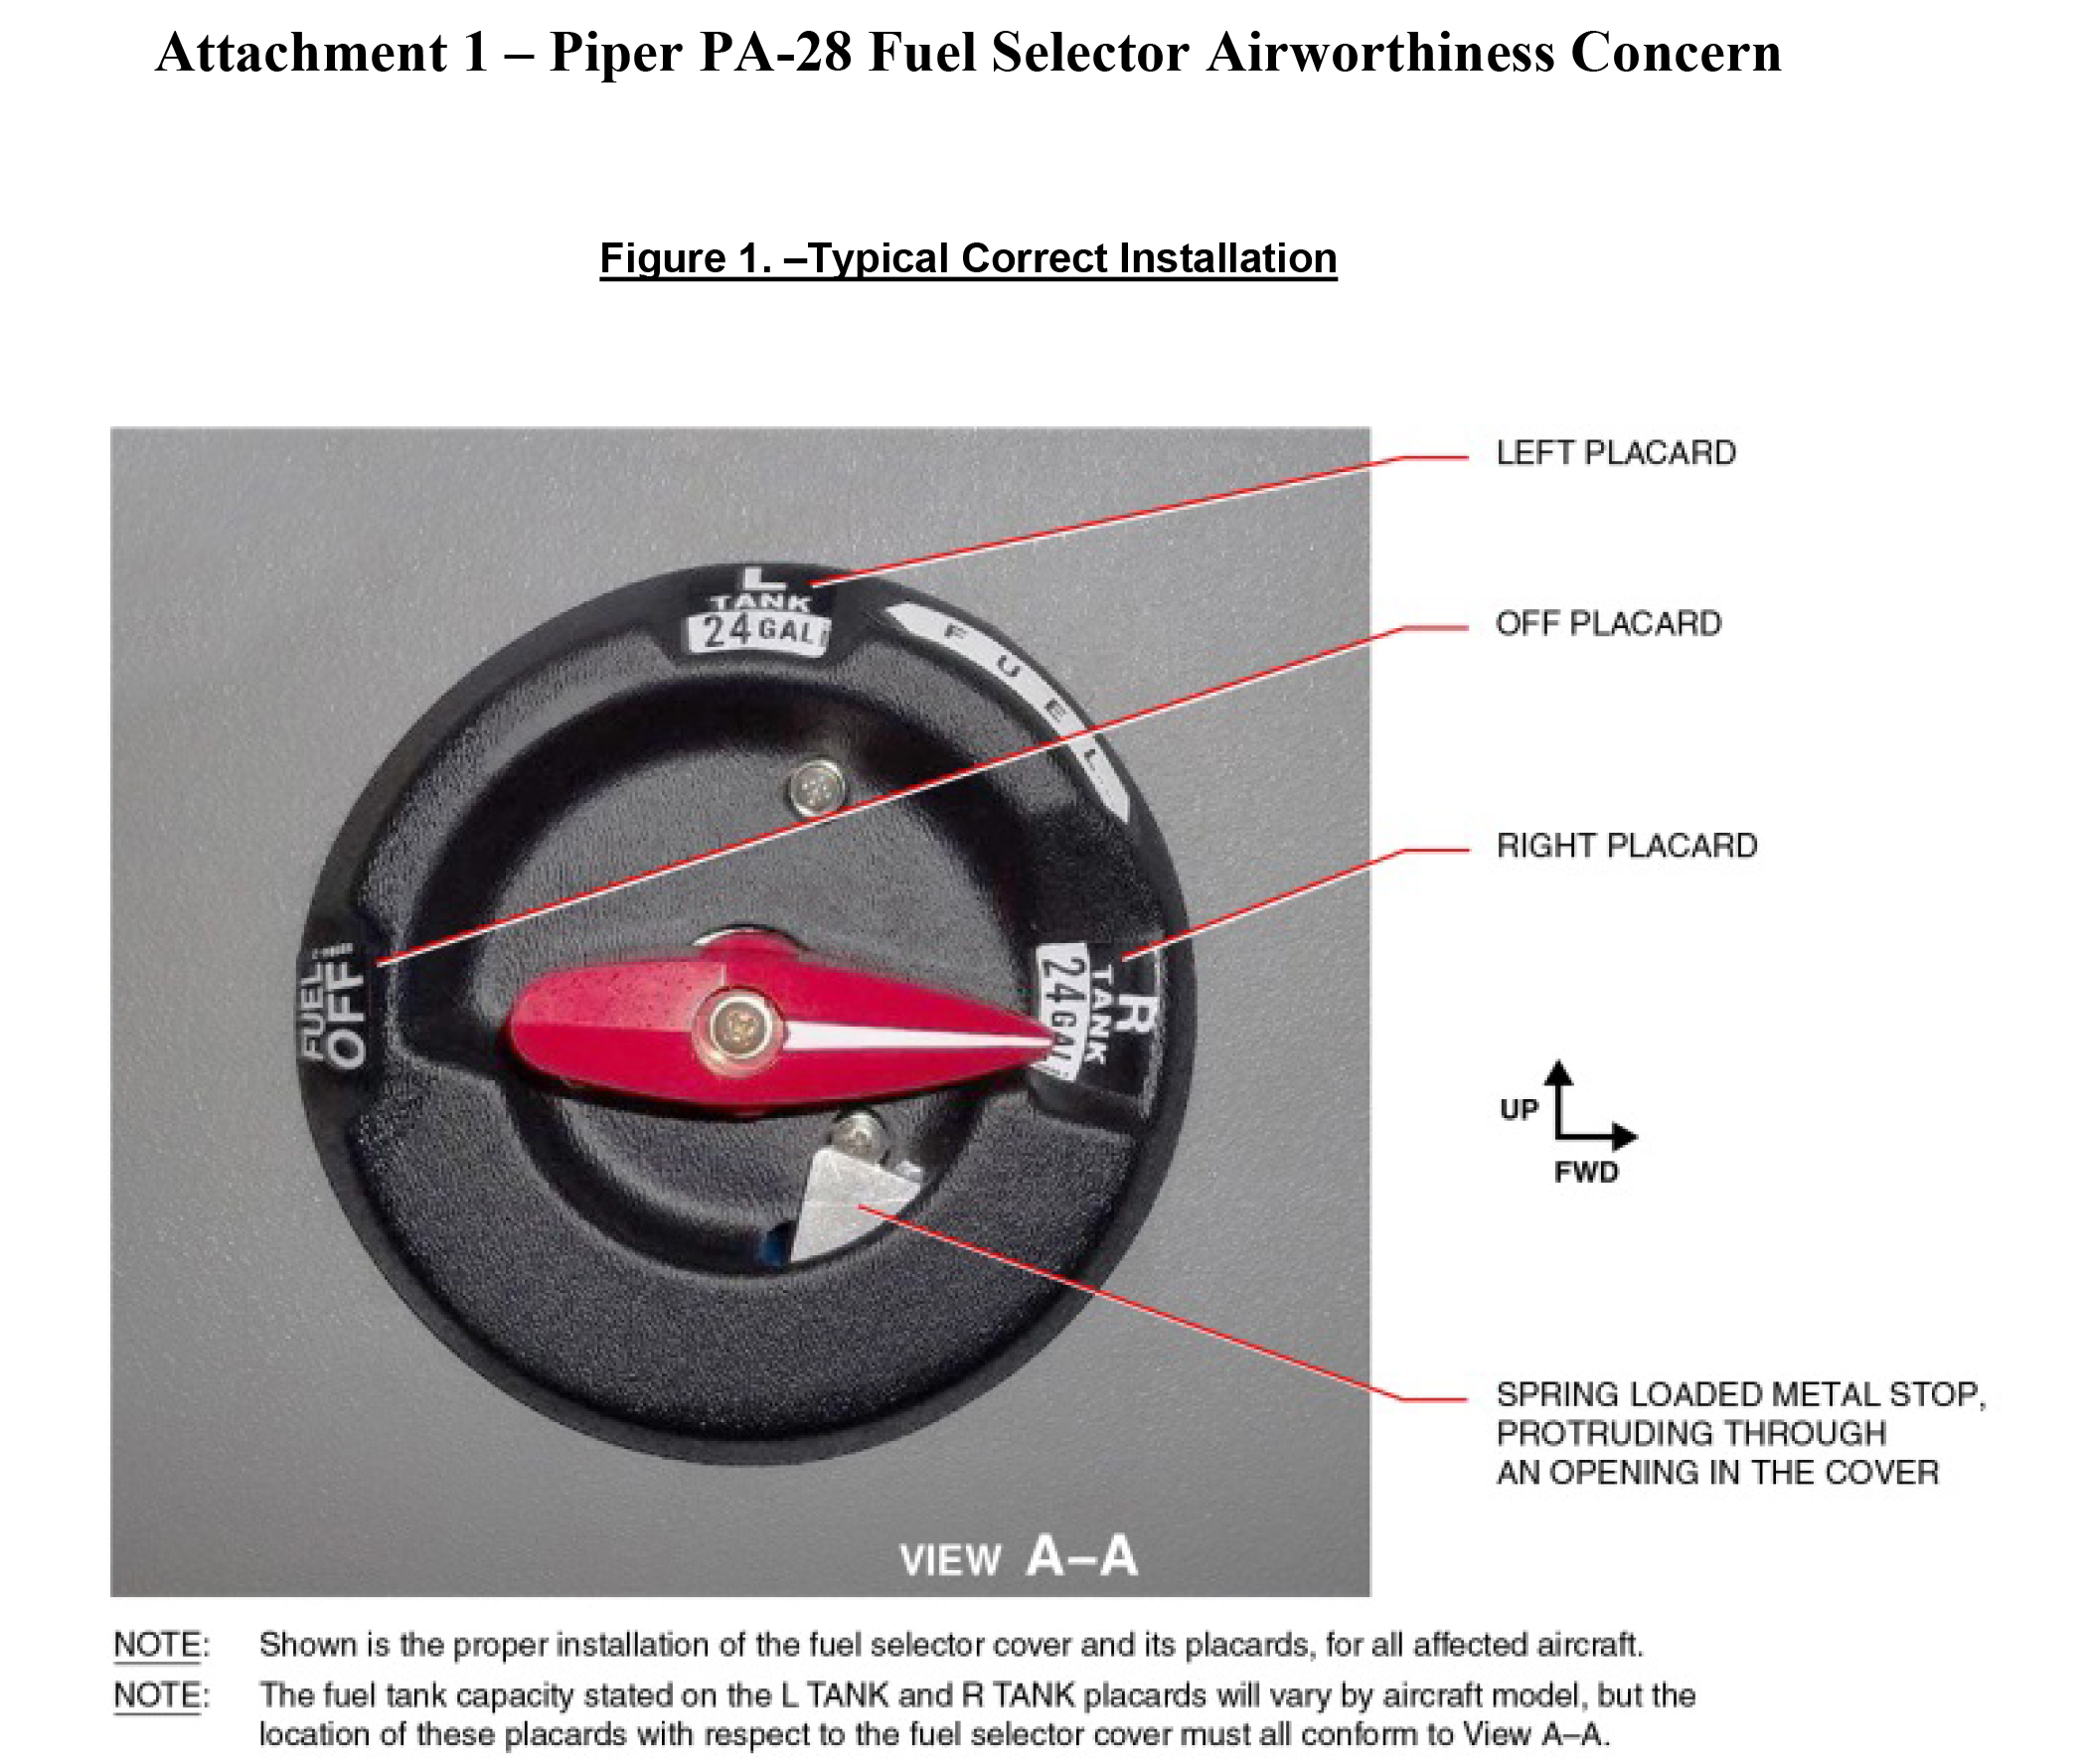 The FAA has issued an airworthiness concern sheet for Piper PA-28 fuel selectors. Image courtesy of the FAA.